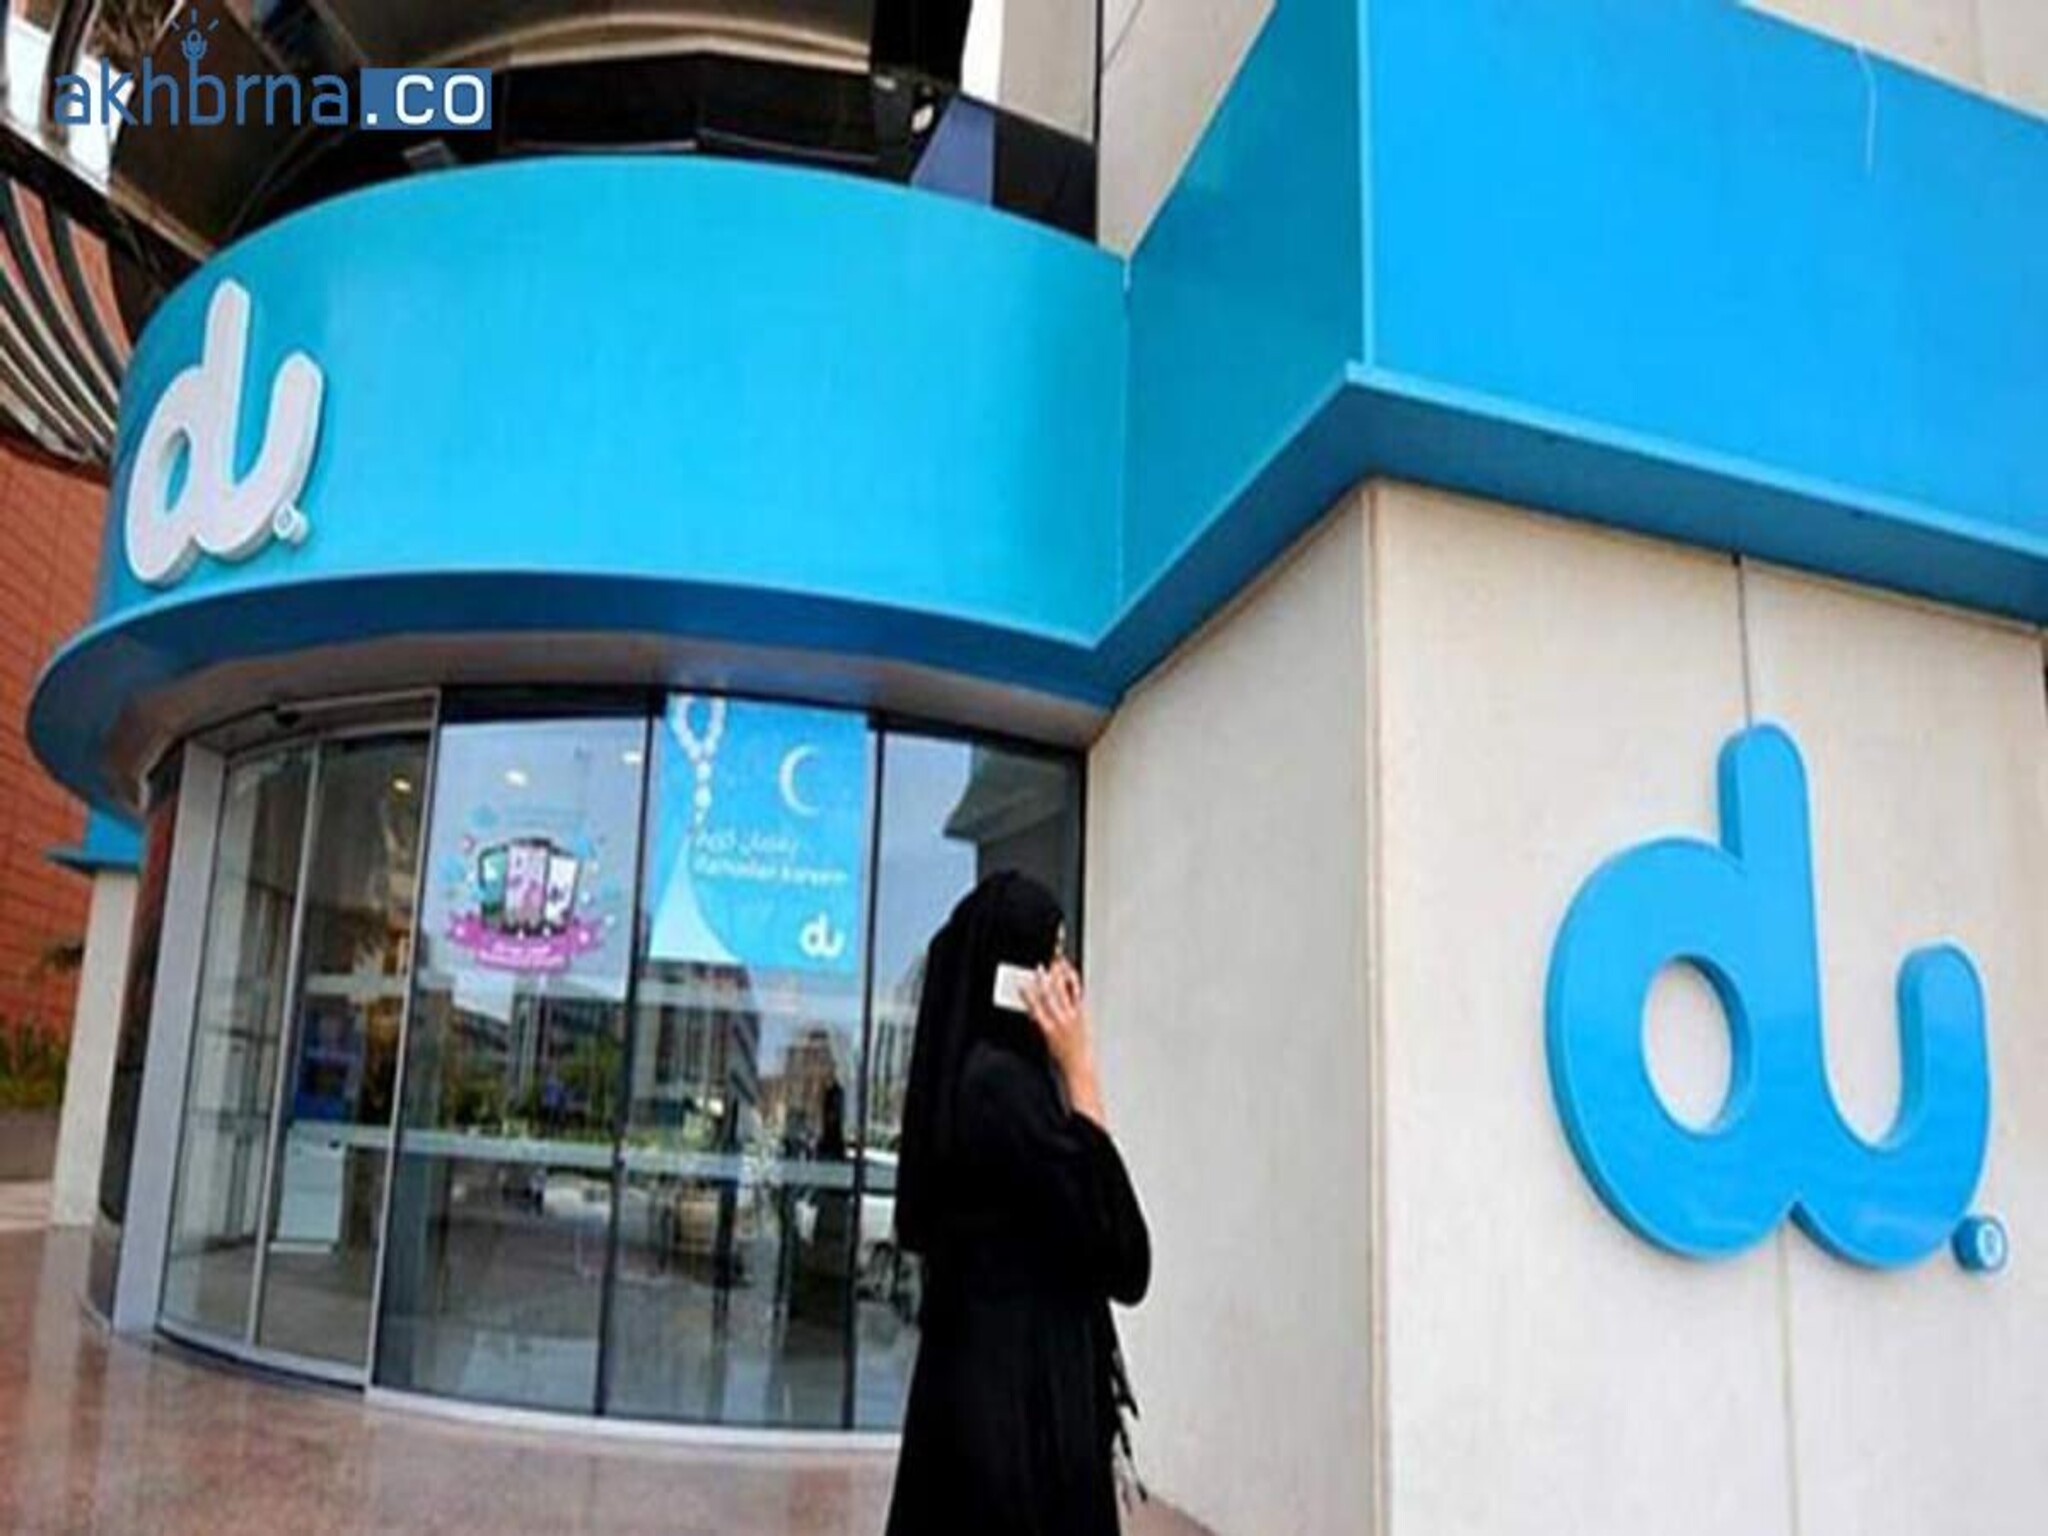  UAE: du Pay, Visa introduce new partnership to increase digital payment options